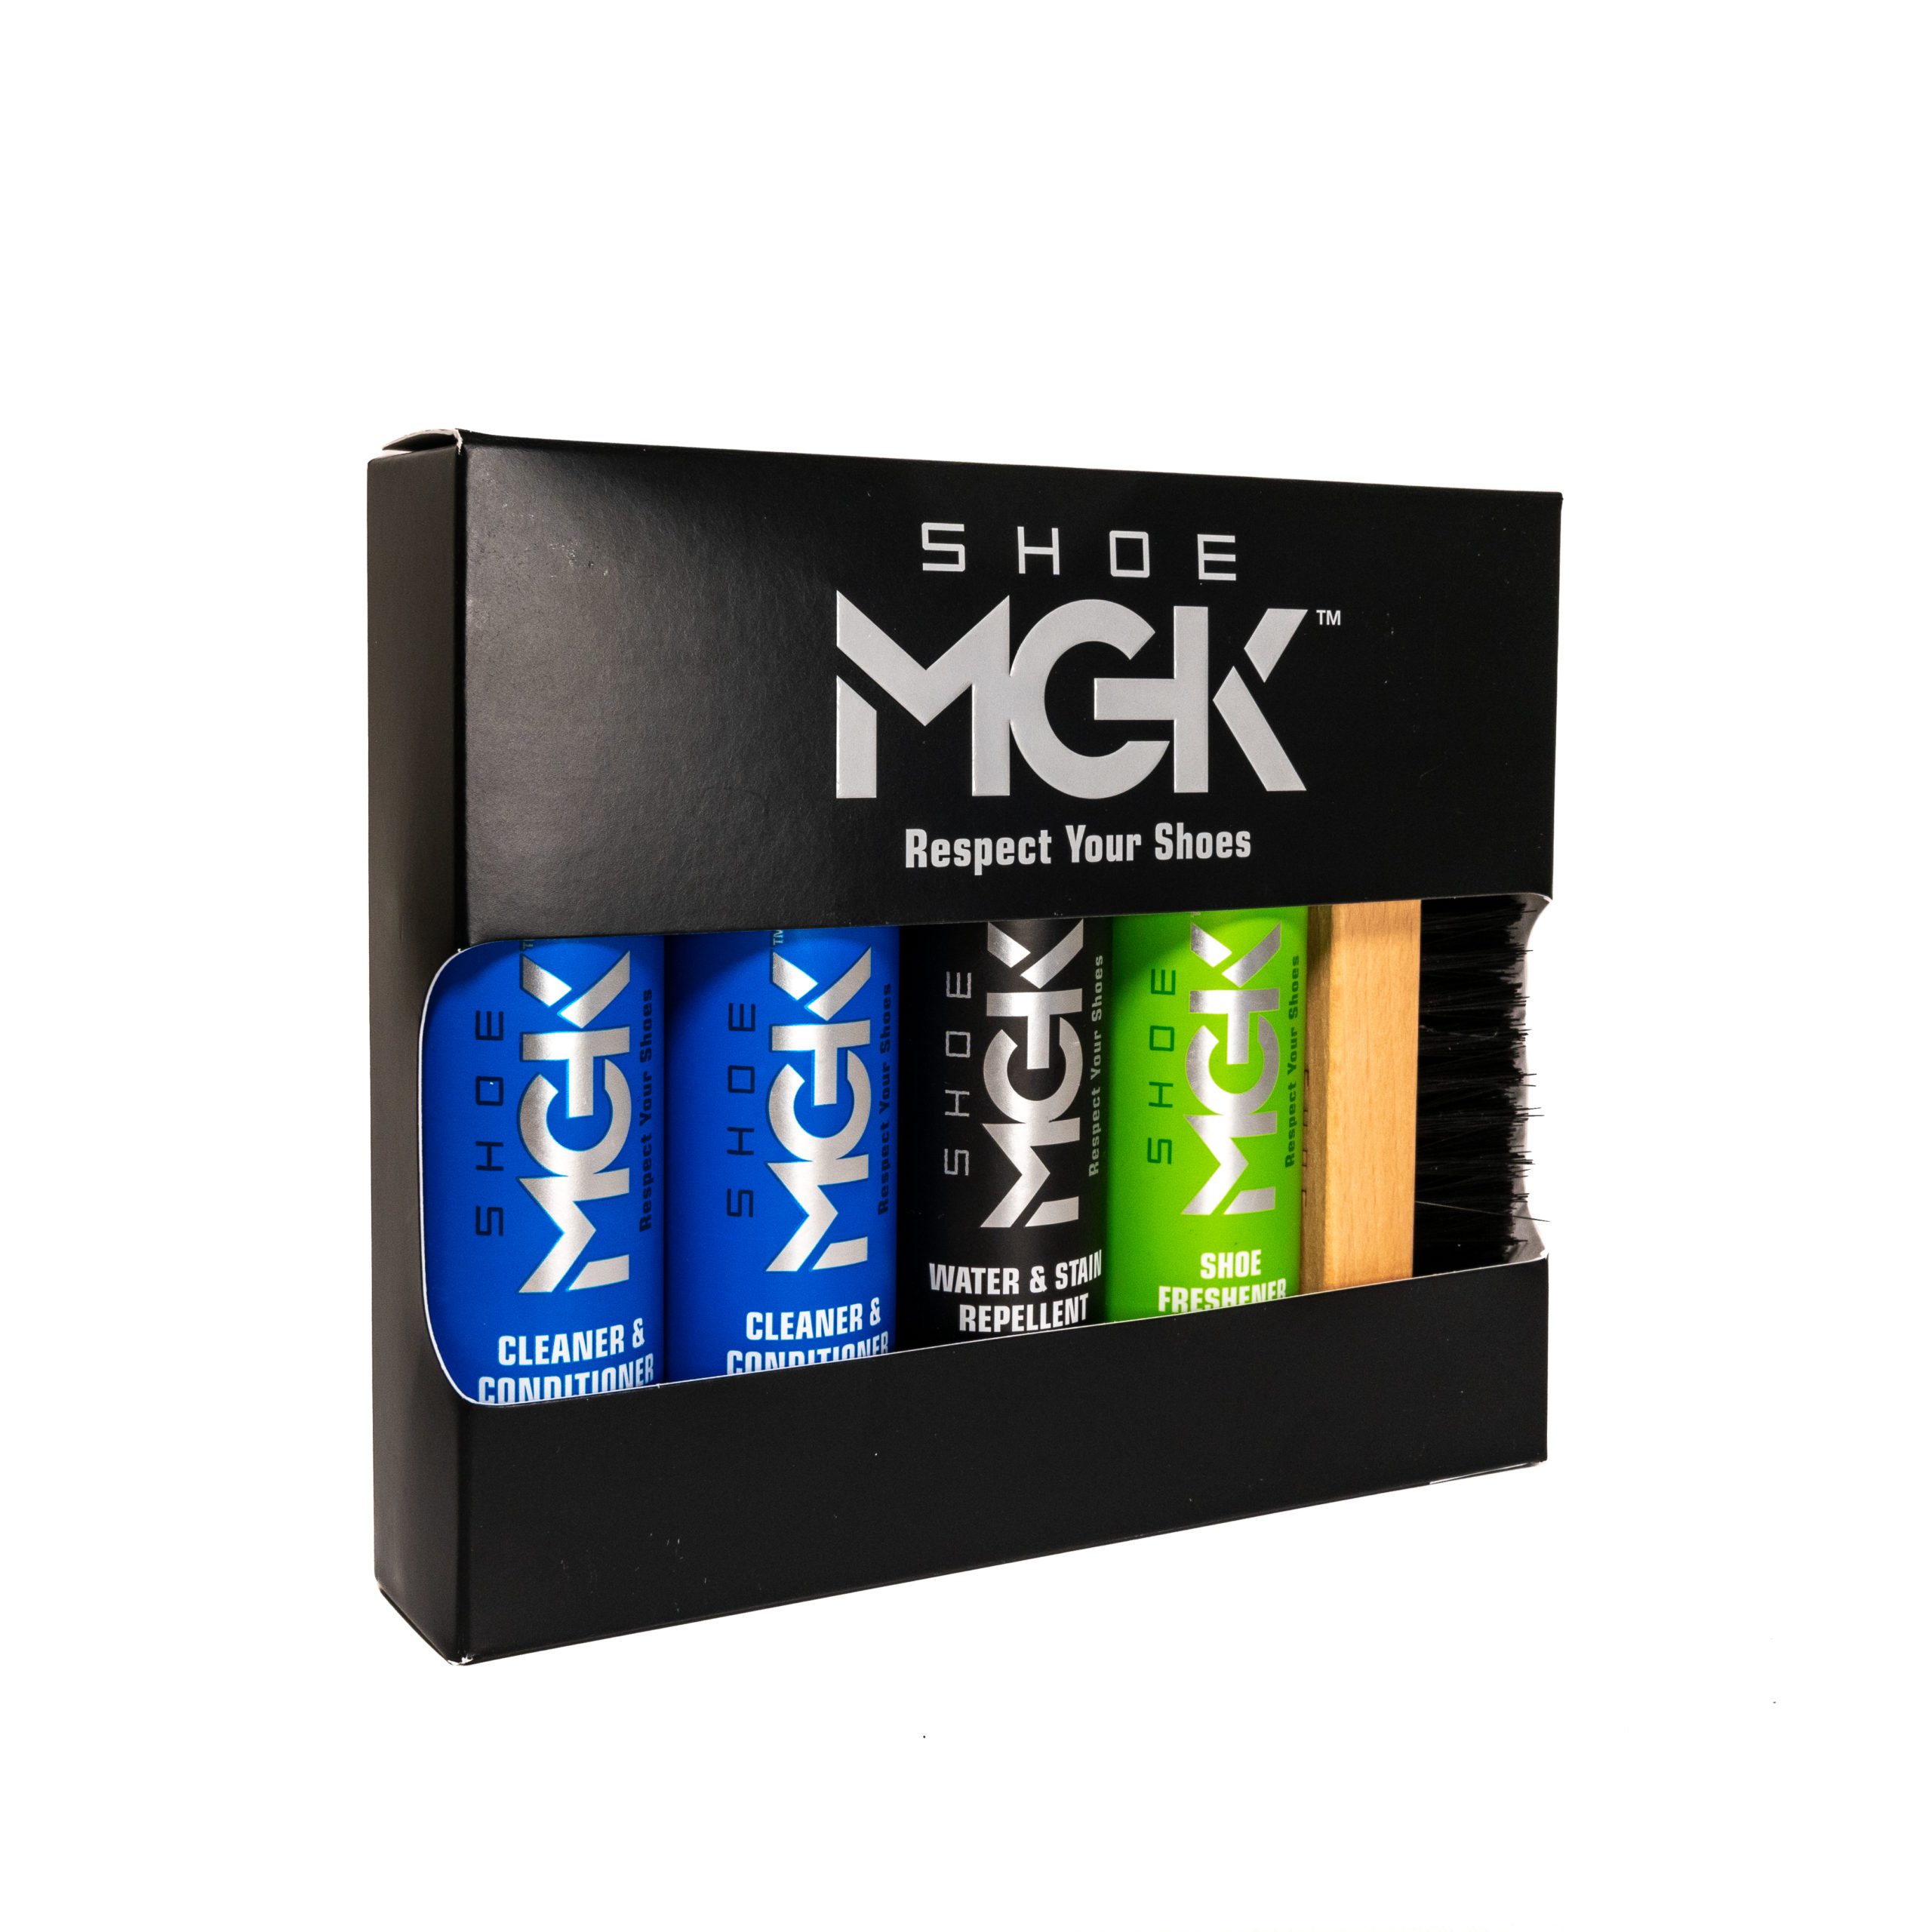 Shoe MGK Complete Kit - Shoe Care Kit to Clean, Protect and Refresh All White Shoes, Leather Shoes, Sneakers, Dress Shoes, and More